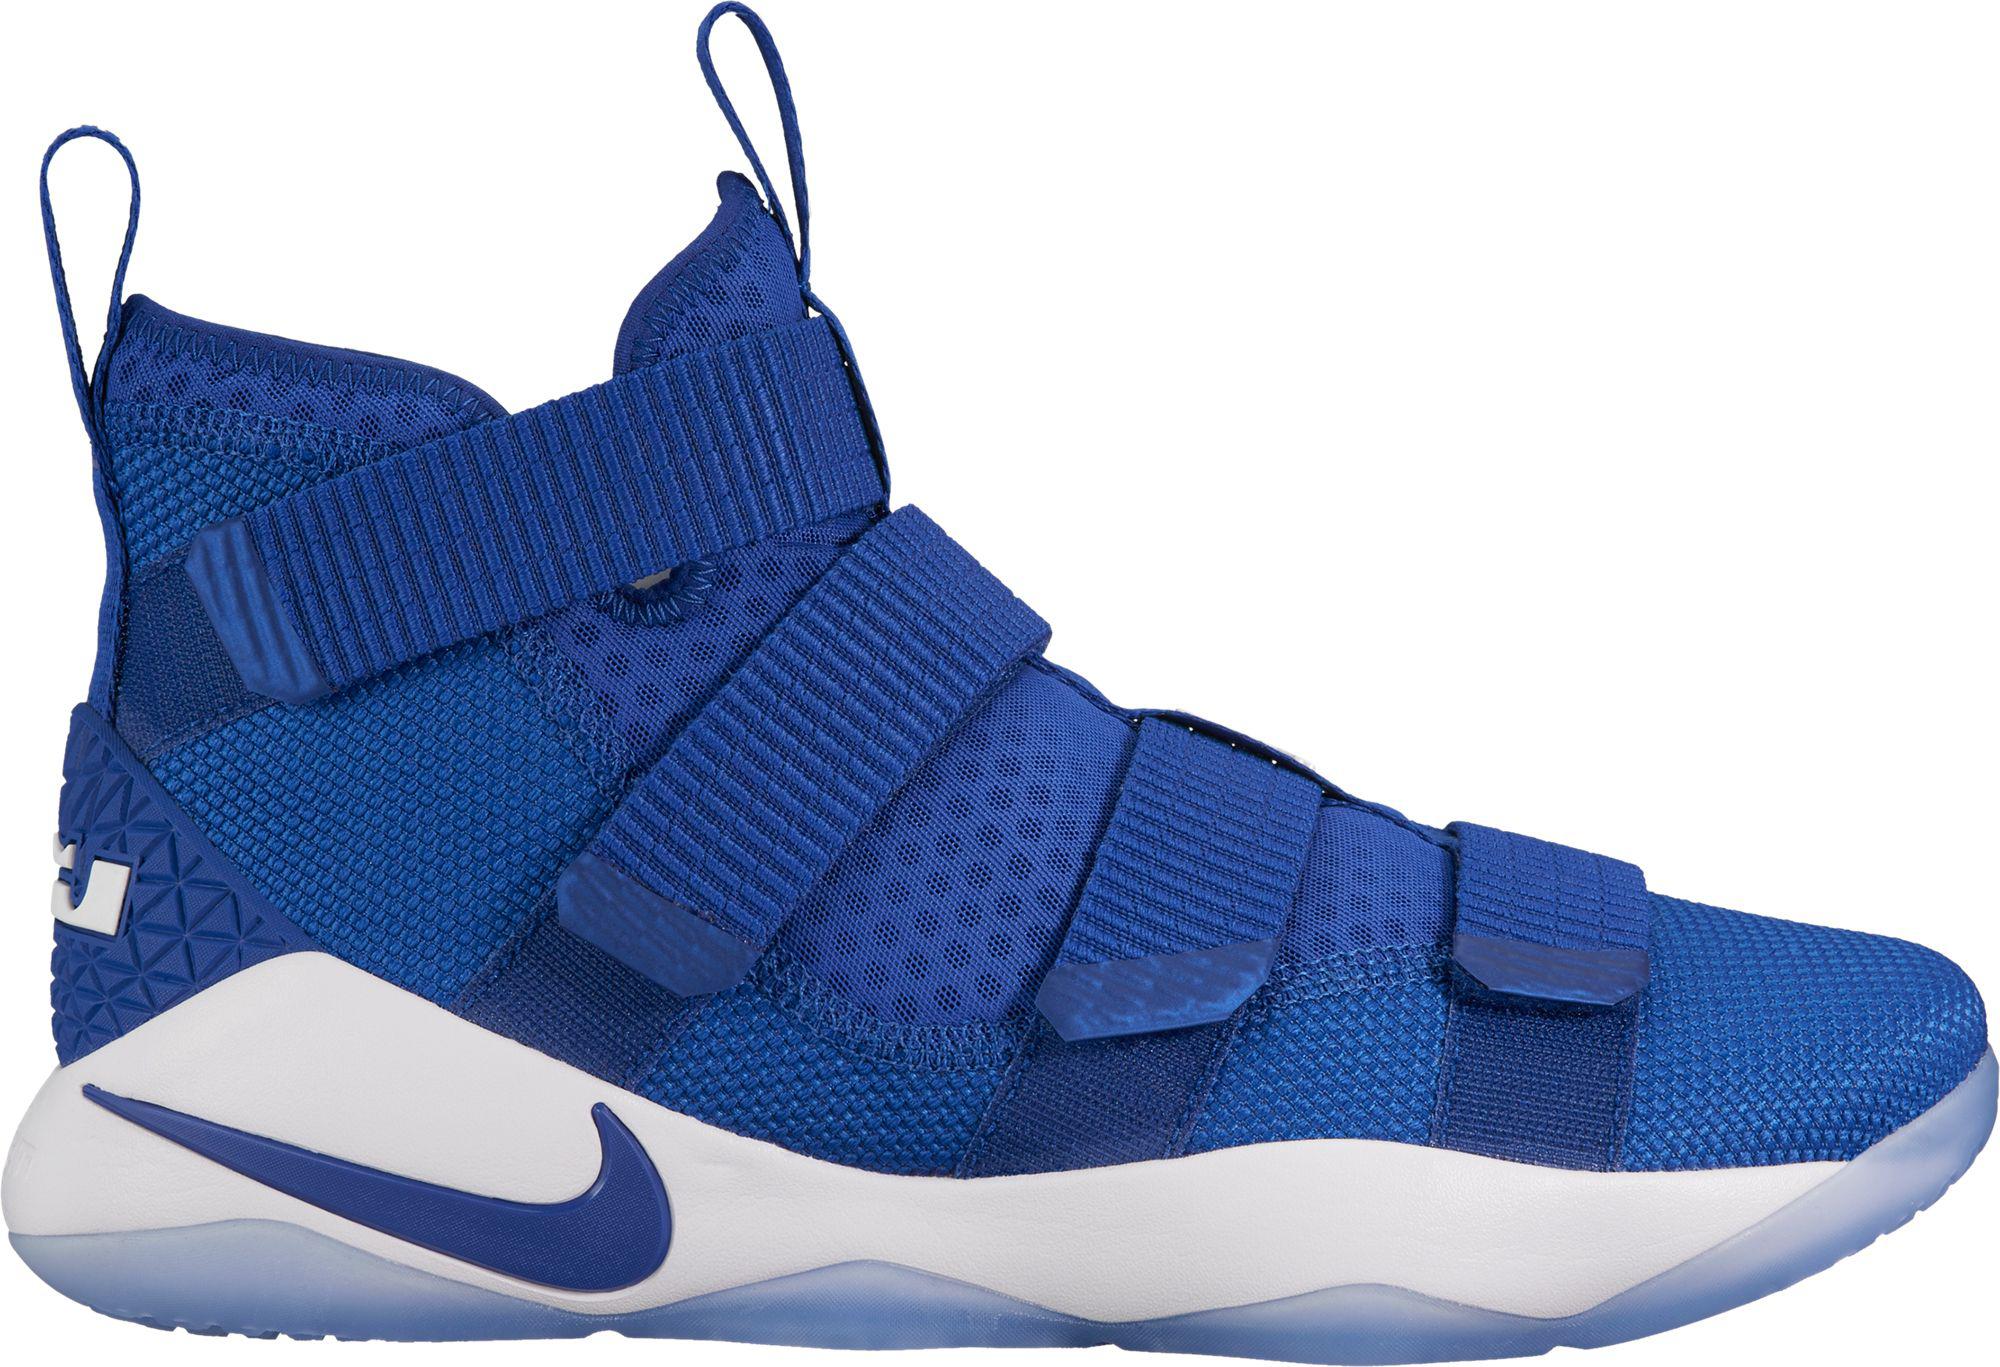 nike men's zoom lebron soldier xi basketball shoes